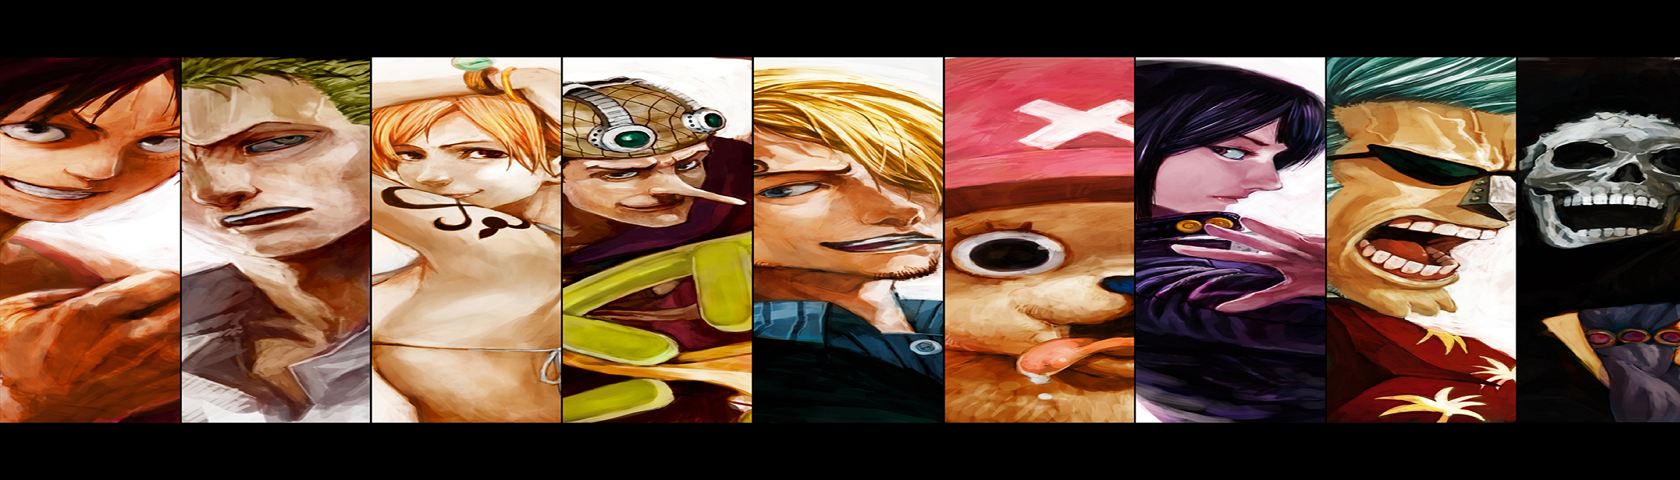 Strawhat Crew • Images • WallpaperFusion by Binary Fortress Software